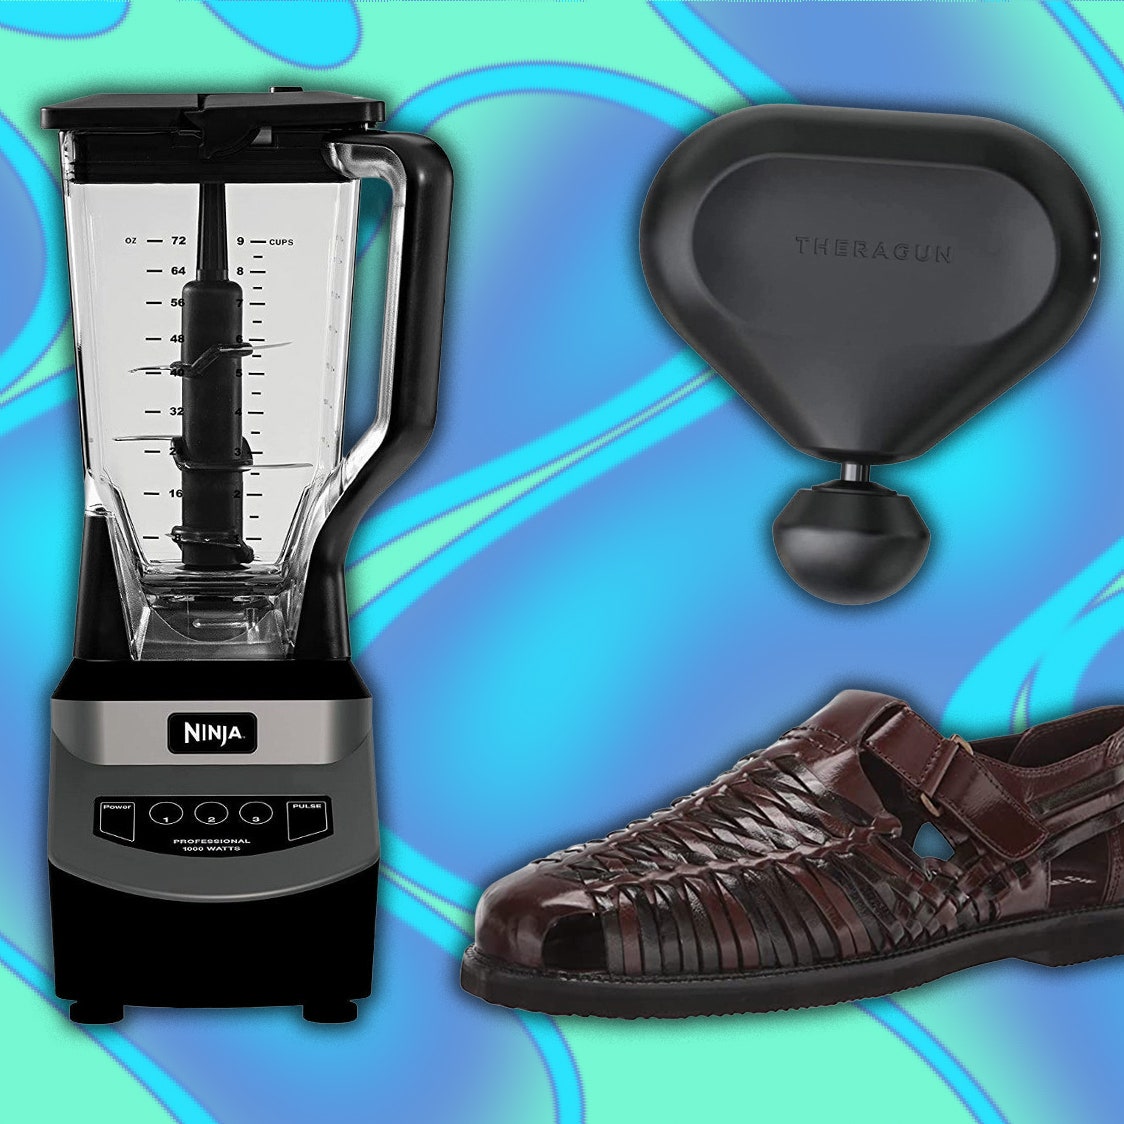 The Best Early Prime Day Deals So Far